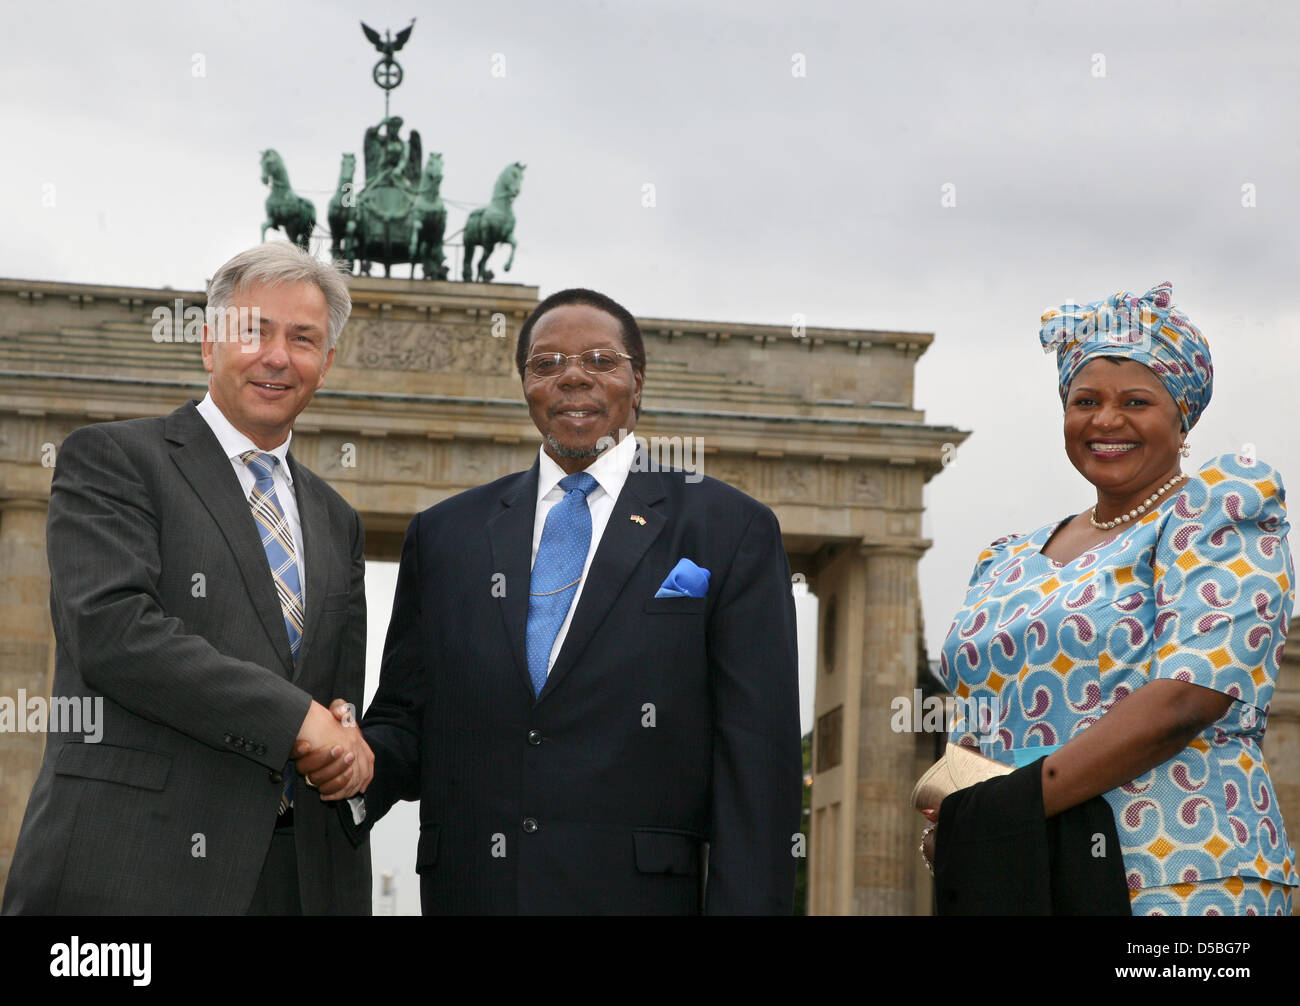 The Malawian President Bingu wa Mutharika and his wife Callista are greeted by the mayor of Berlin Klaus Wowereit in front of the Brandenburg Gate in Berlin, Germany, 02 September 2010. Mutharaki is in Germany for a state visit of several day's duration. Photo: Stephanie Pilick Stock Photo